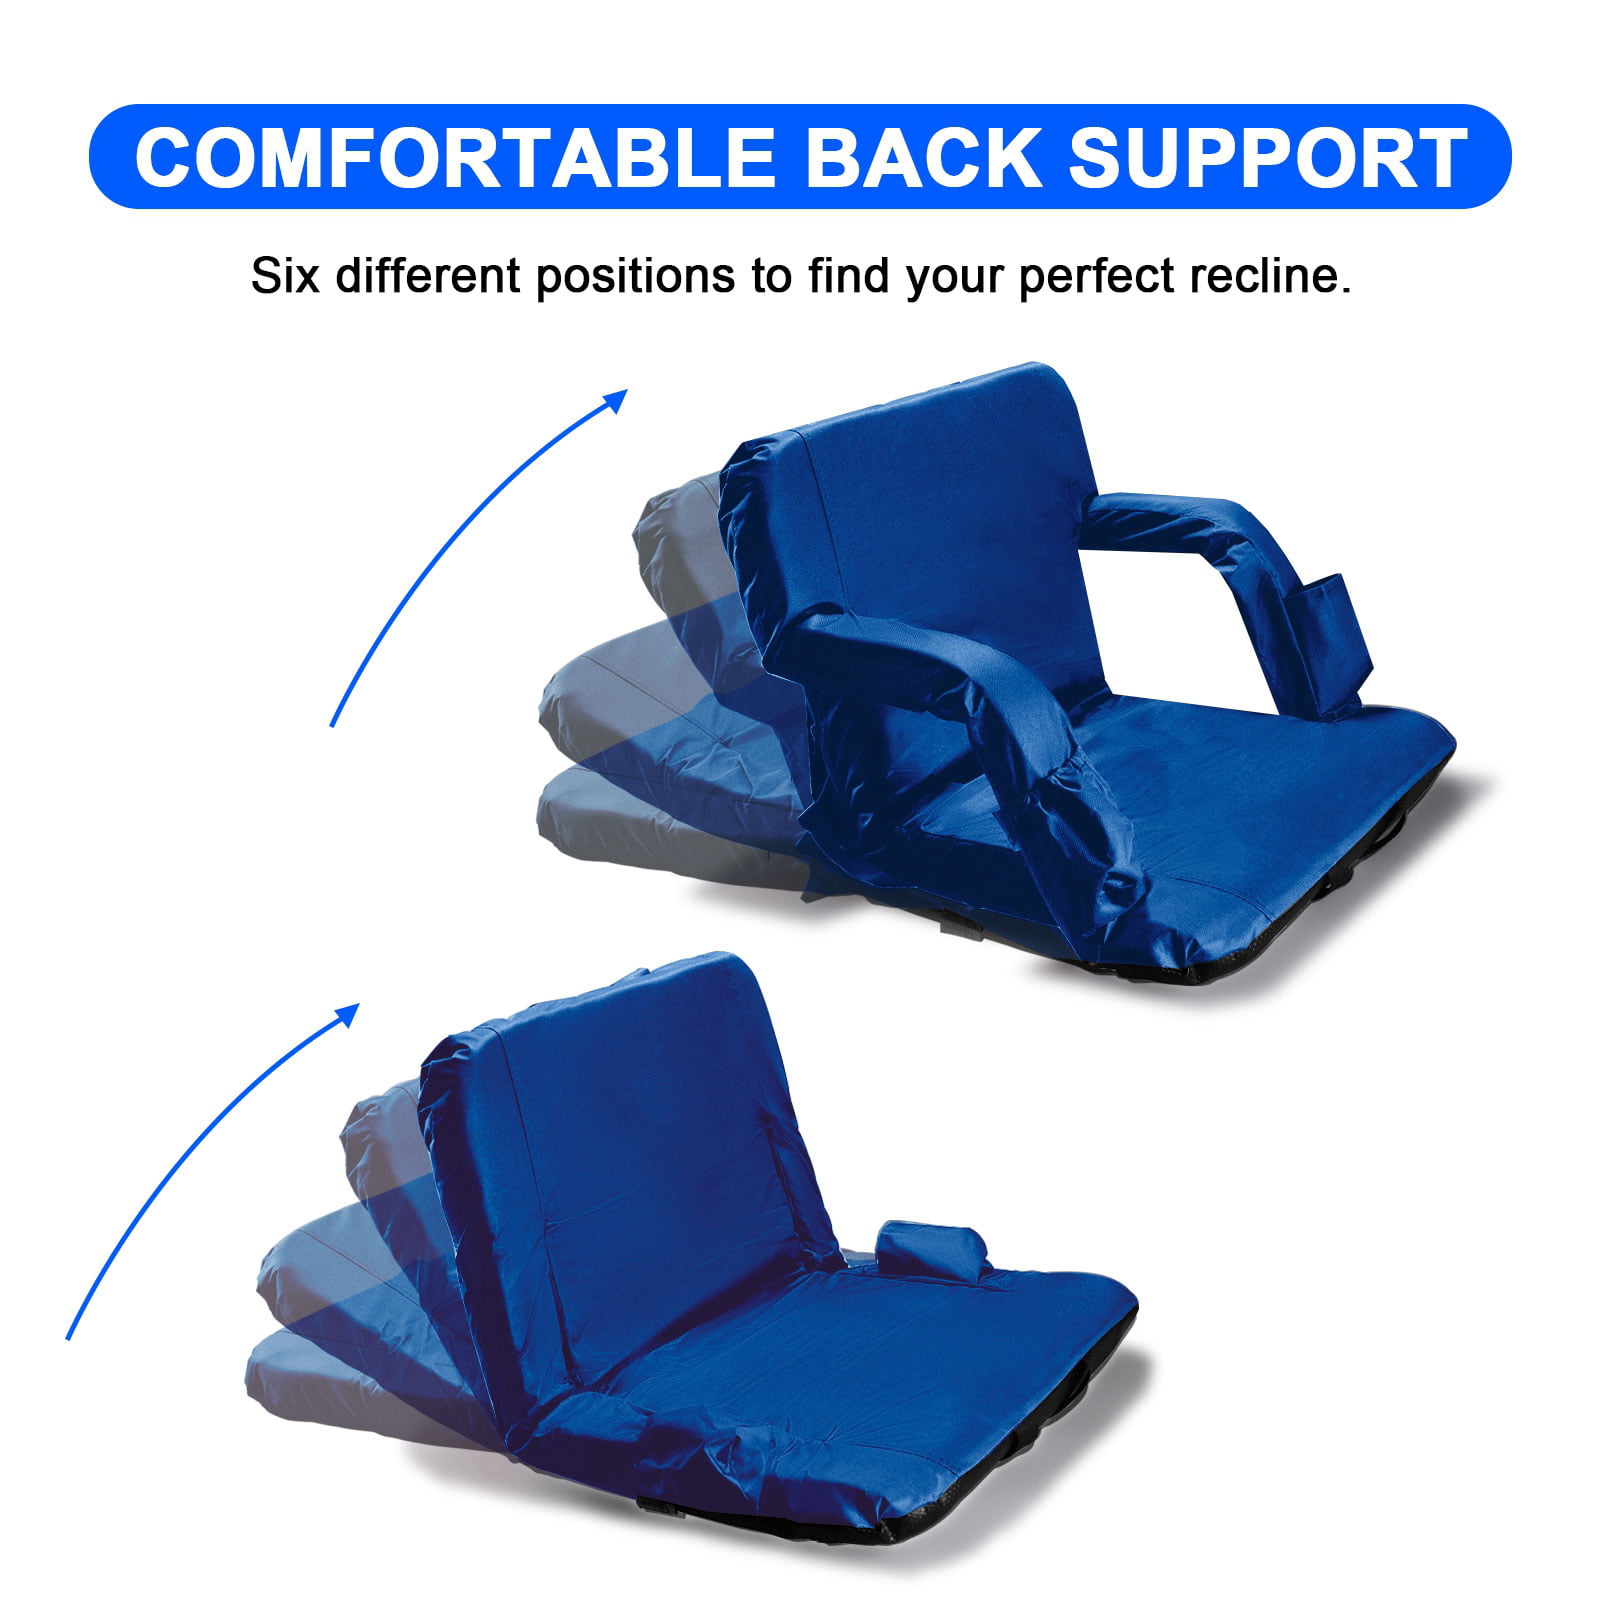 Wide Stadium Seat Chair - Bleacher Cushion with Padded Back Support,  Armrests, 6 Reclining Positions by Home-Complete - Bed Bath & Beyond -  24232575